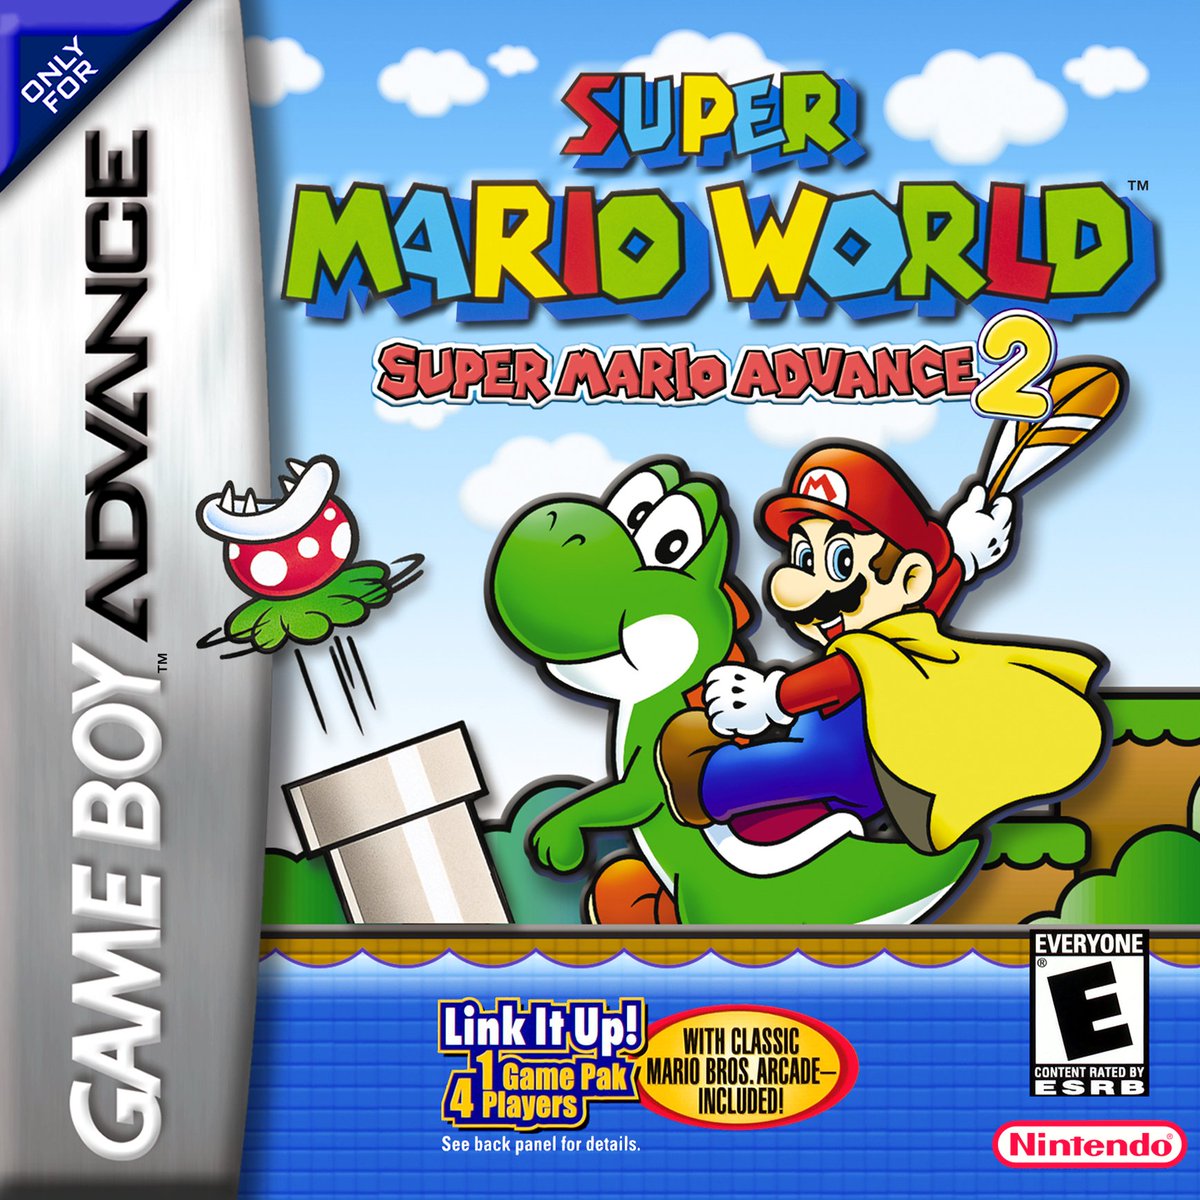 Super Mario World (SNES Online) and my old SMW Player's Guide : r/gaming